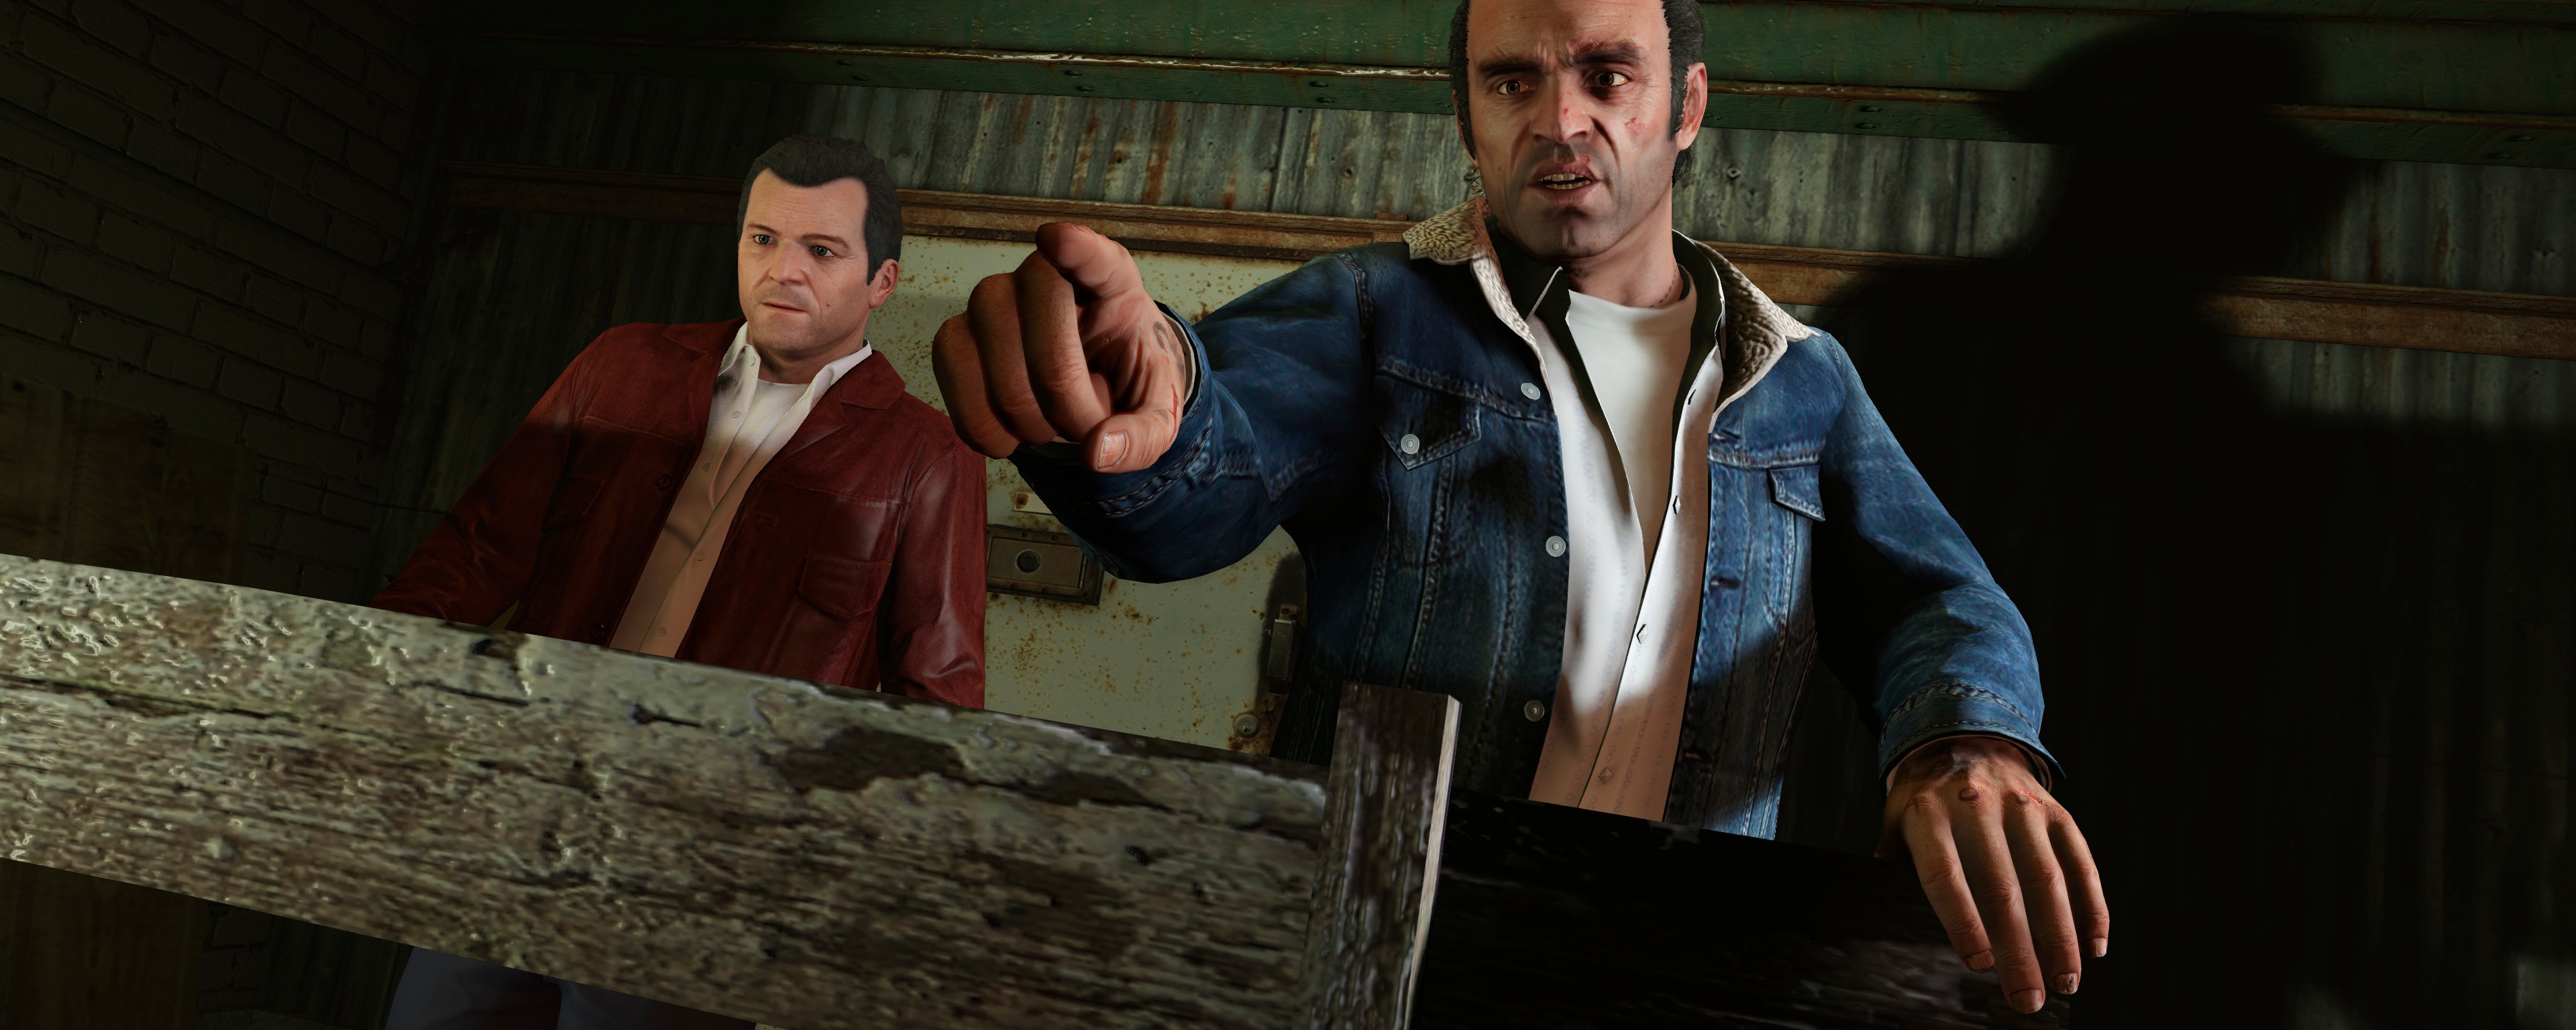 Rockstar Is Seizing Stealth Money From Cheaters In Grand Theft